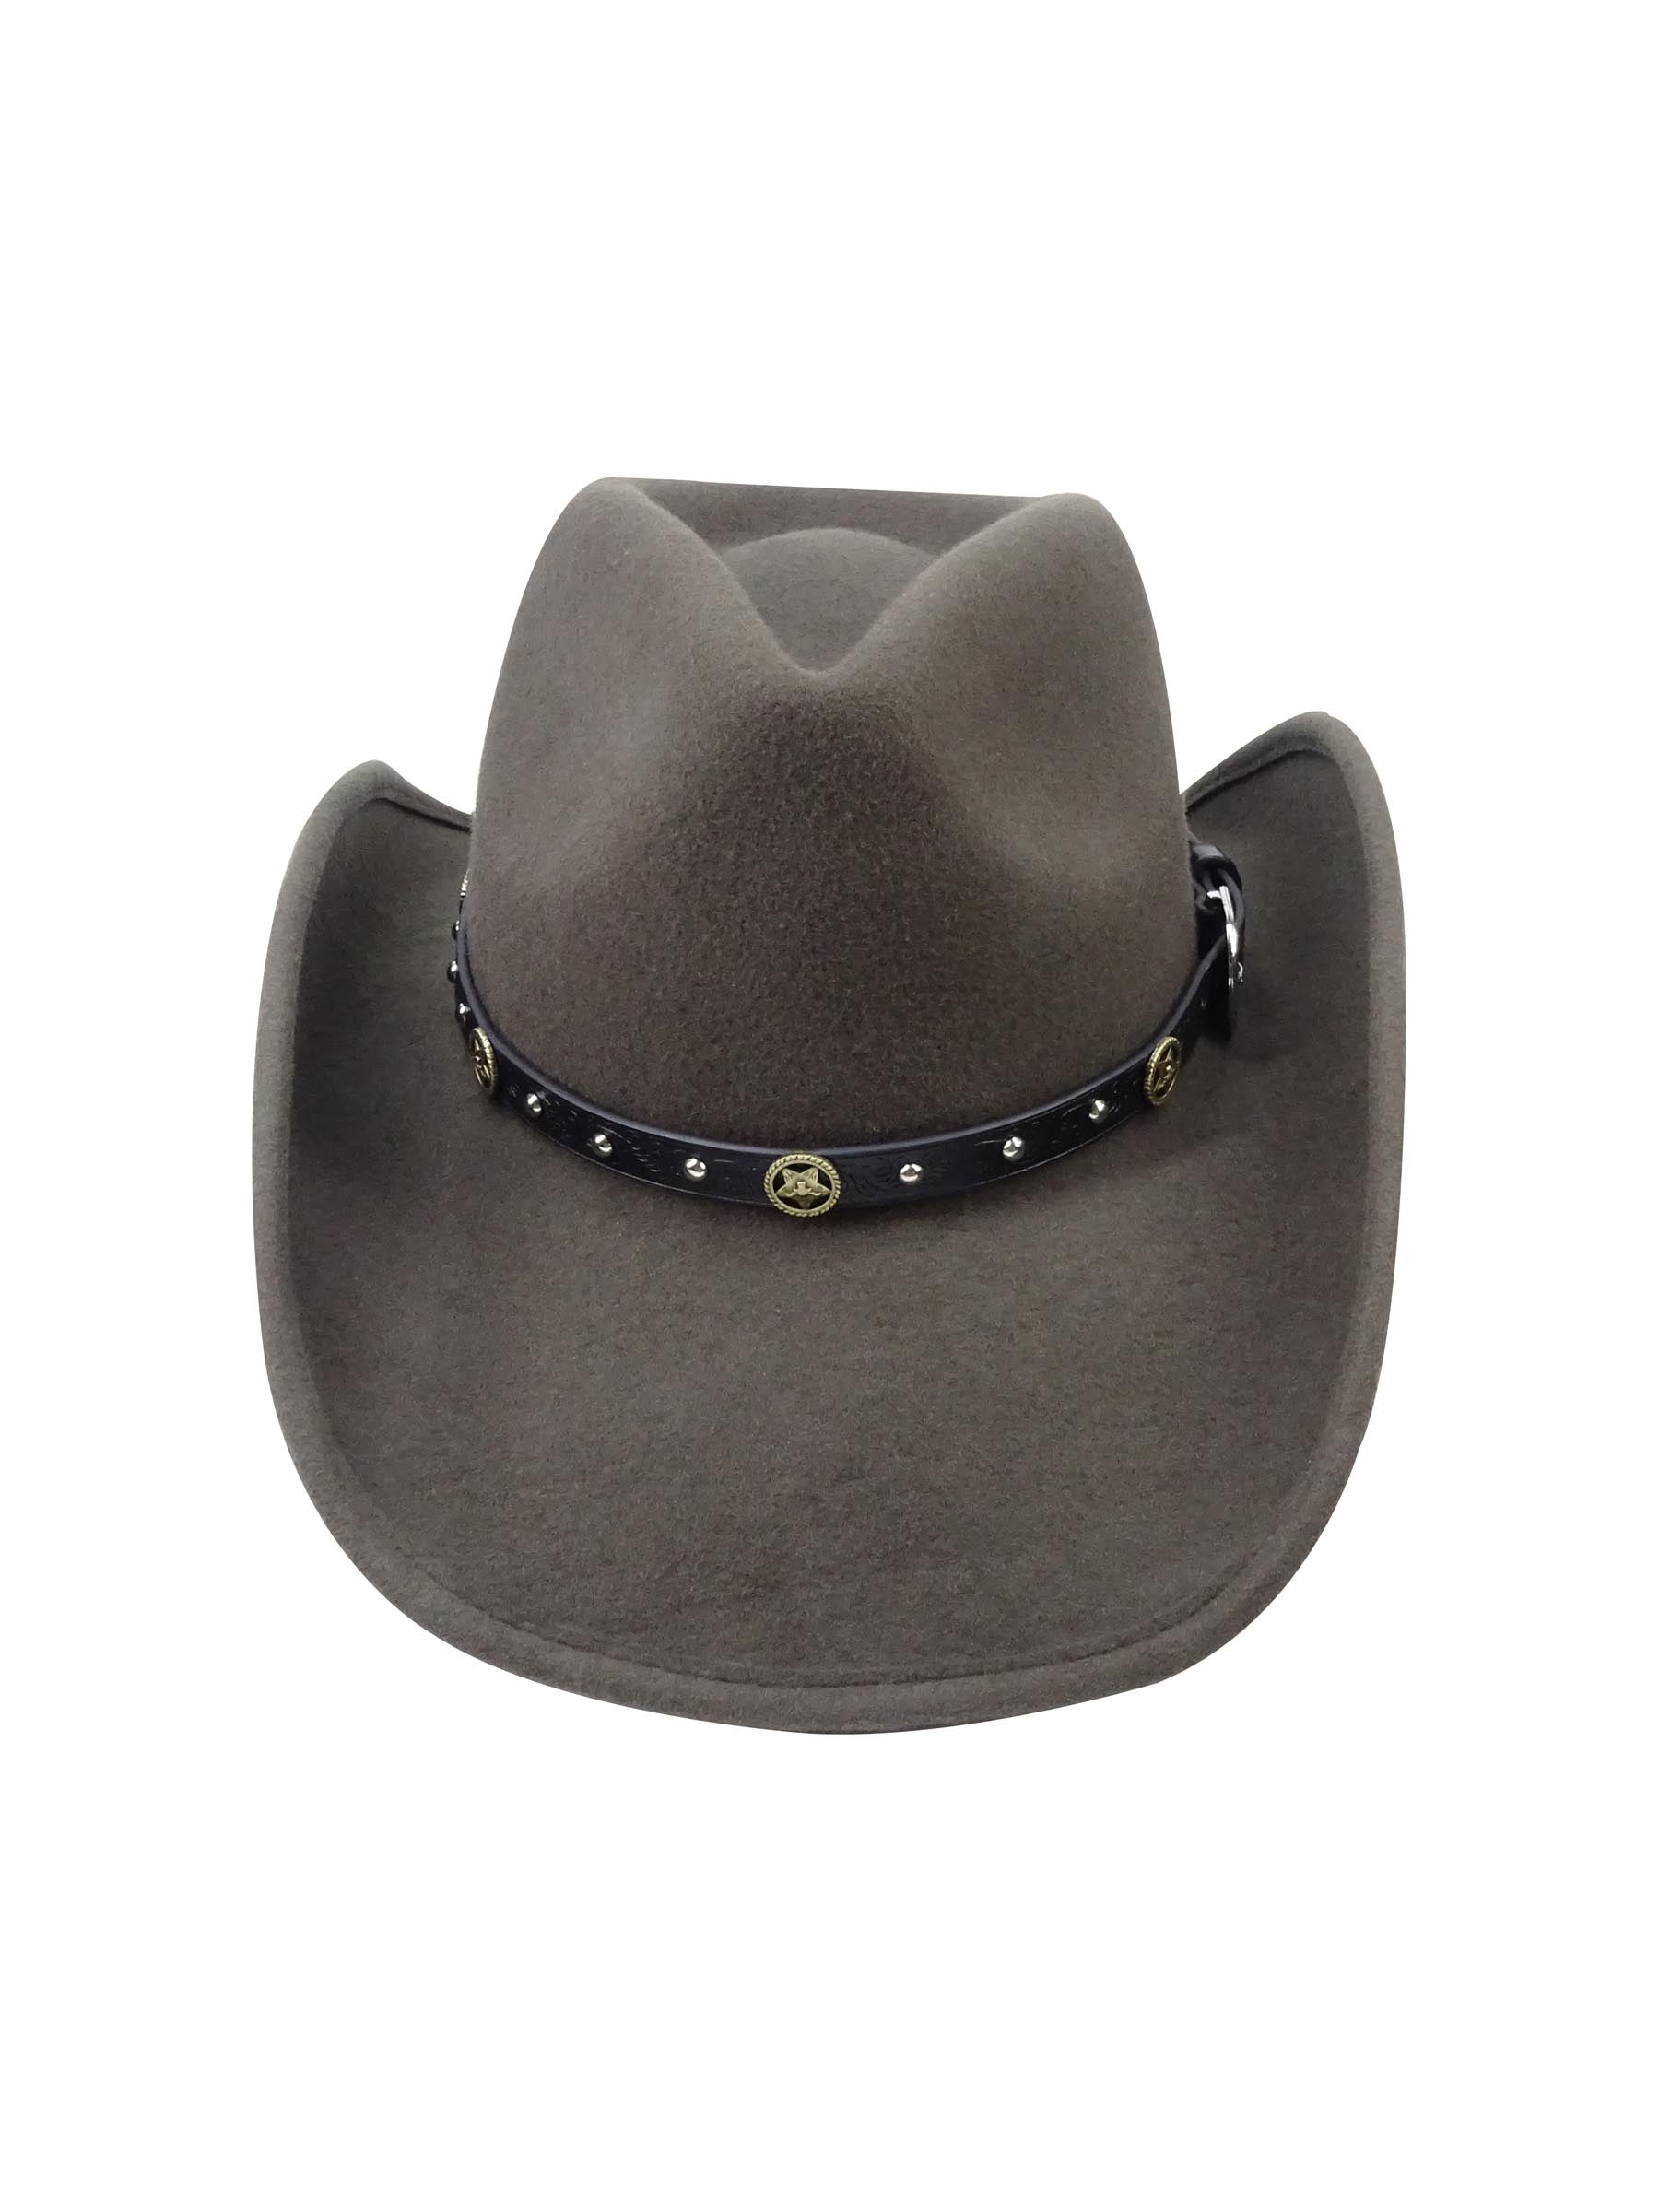 Western Hat Band for Cowboy Hats by Silver Canyon, Vegan Leather with Star Concho and Studs